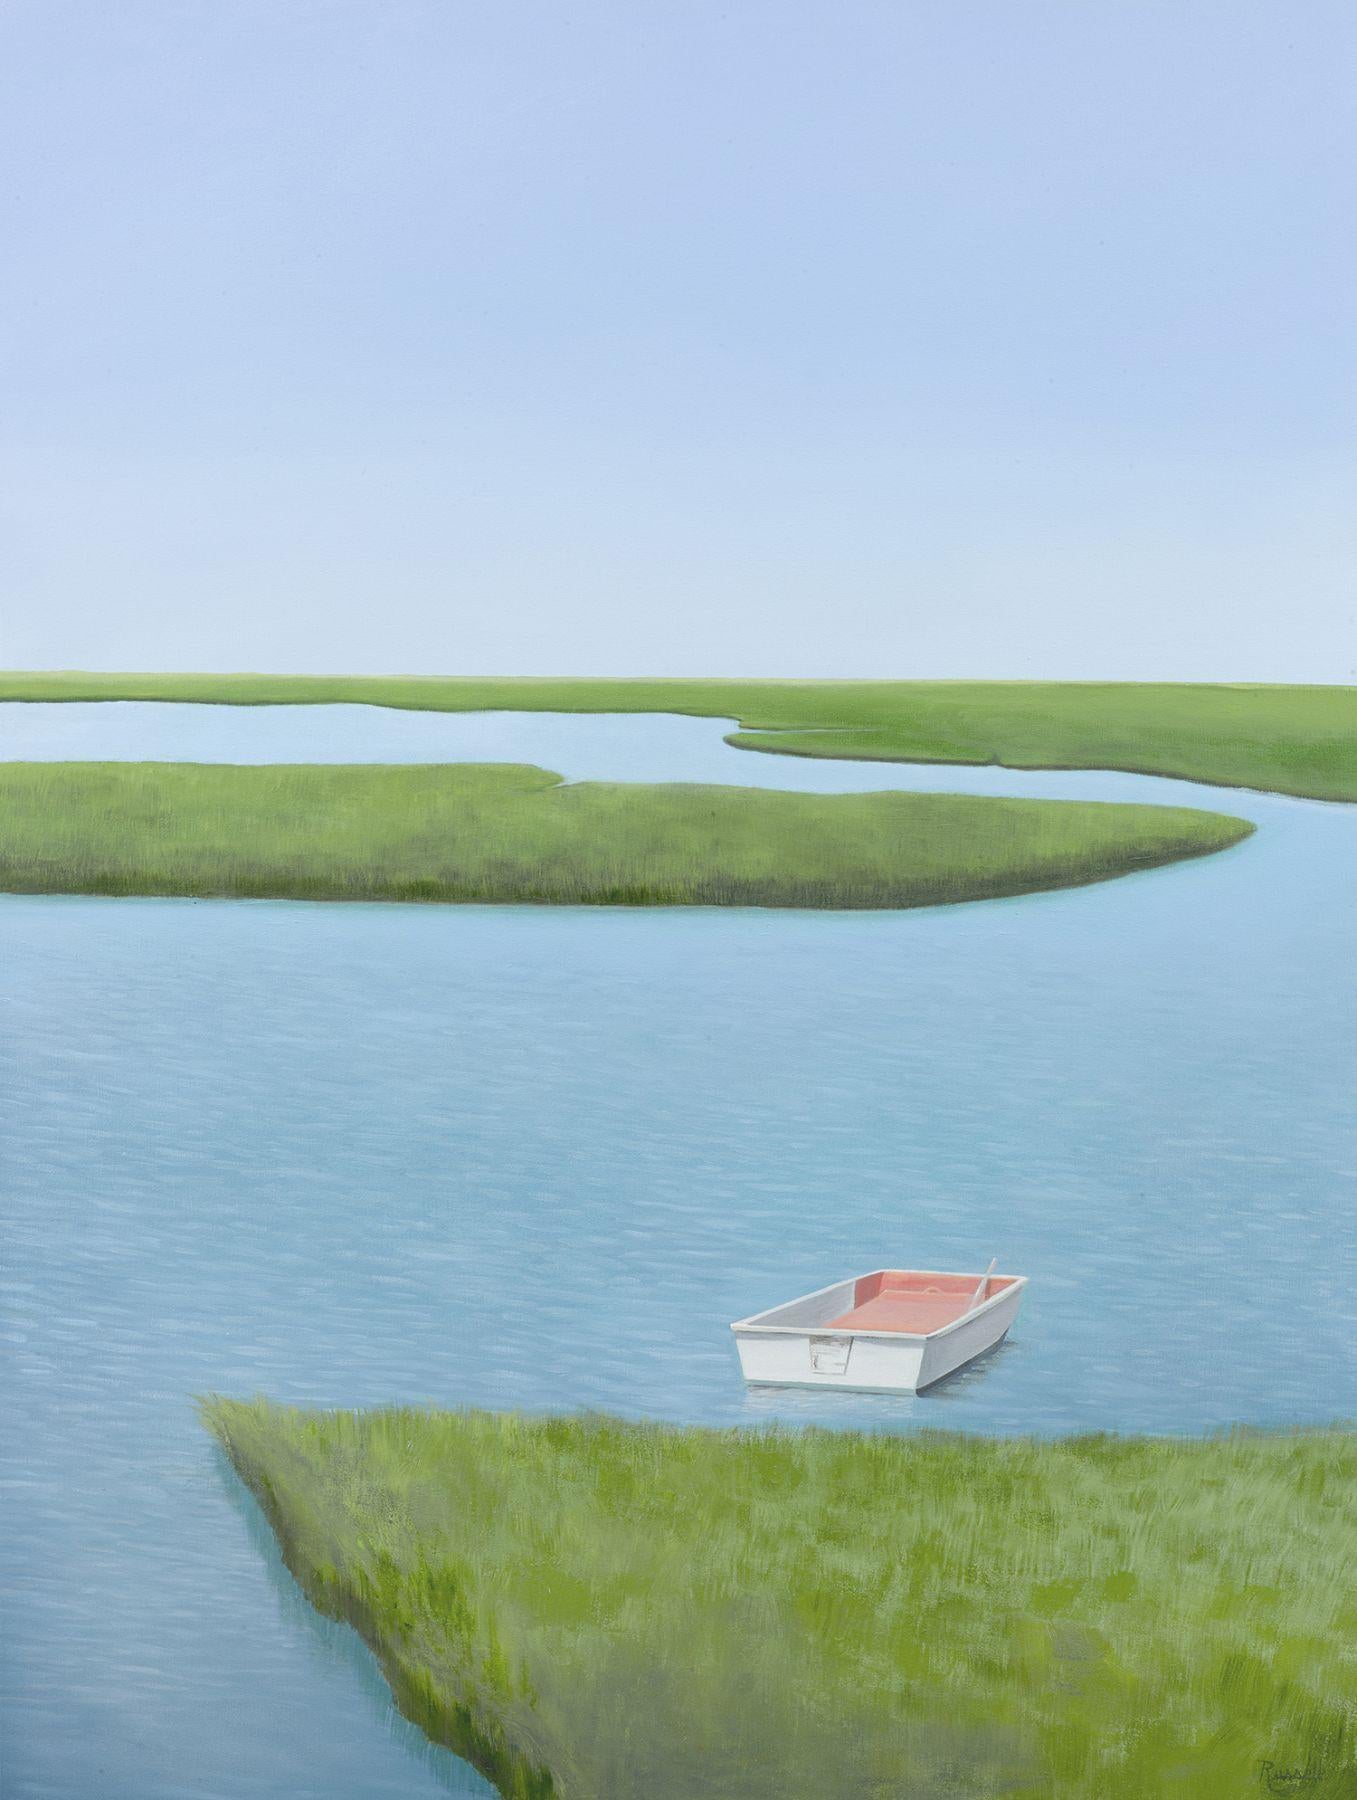 "On A Sunny Afternoon" is a 48x36 oil painting on canvas by artist Matthew Jay Russell, featuring a lone white rowboat in the grasses of a lush grassy marsh wetland. The empty vessel gives a sense of calm in front of bright blue summer skies.